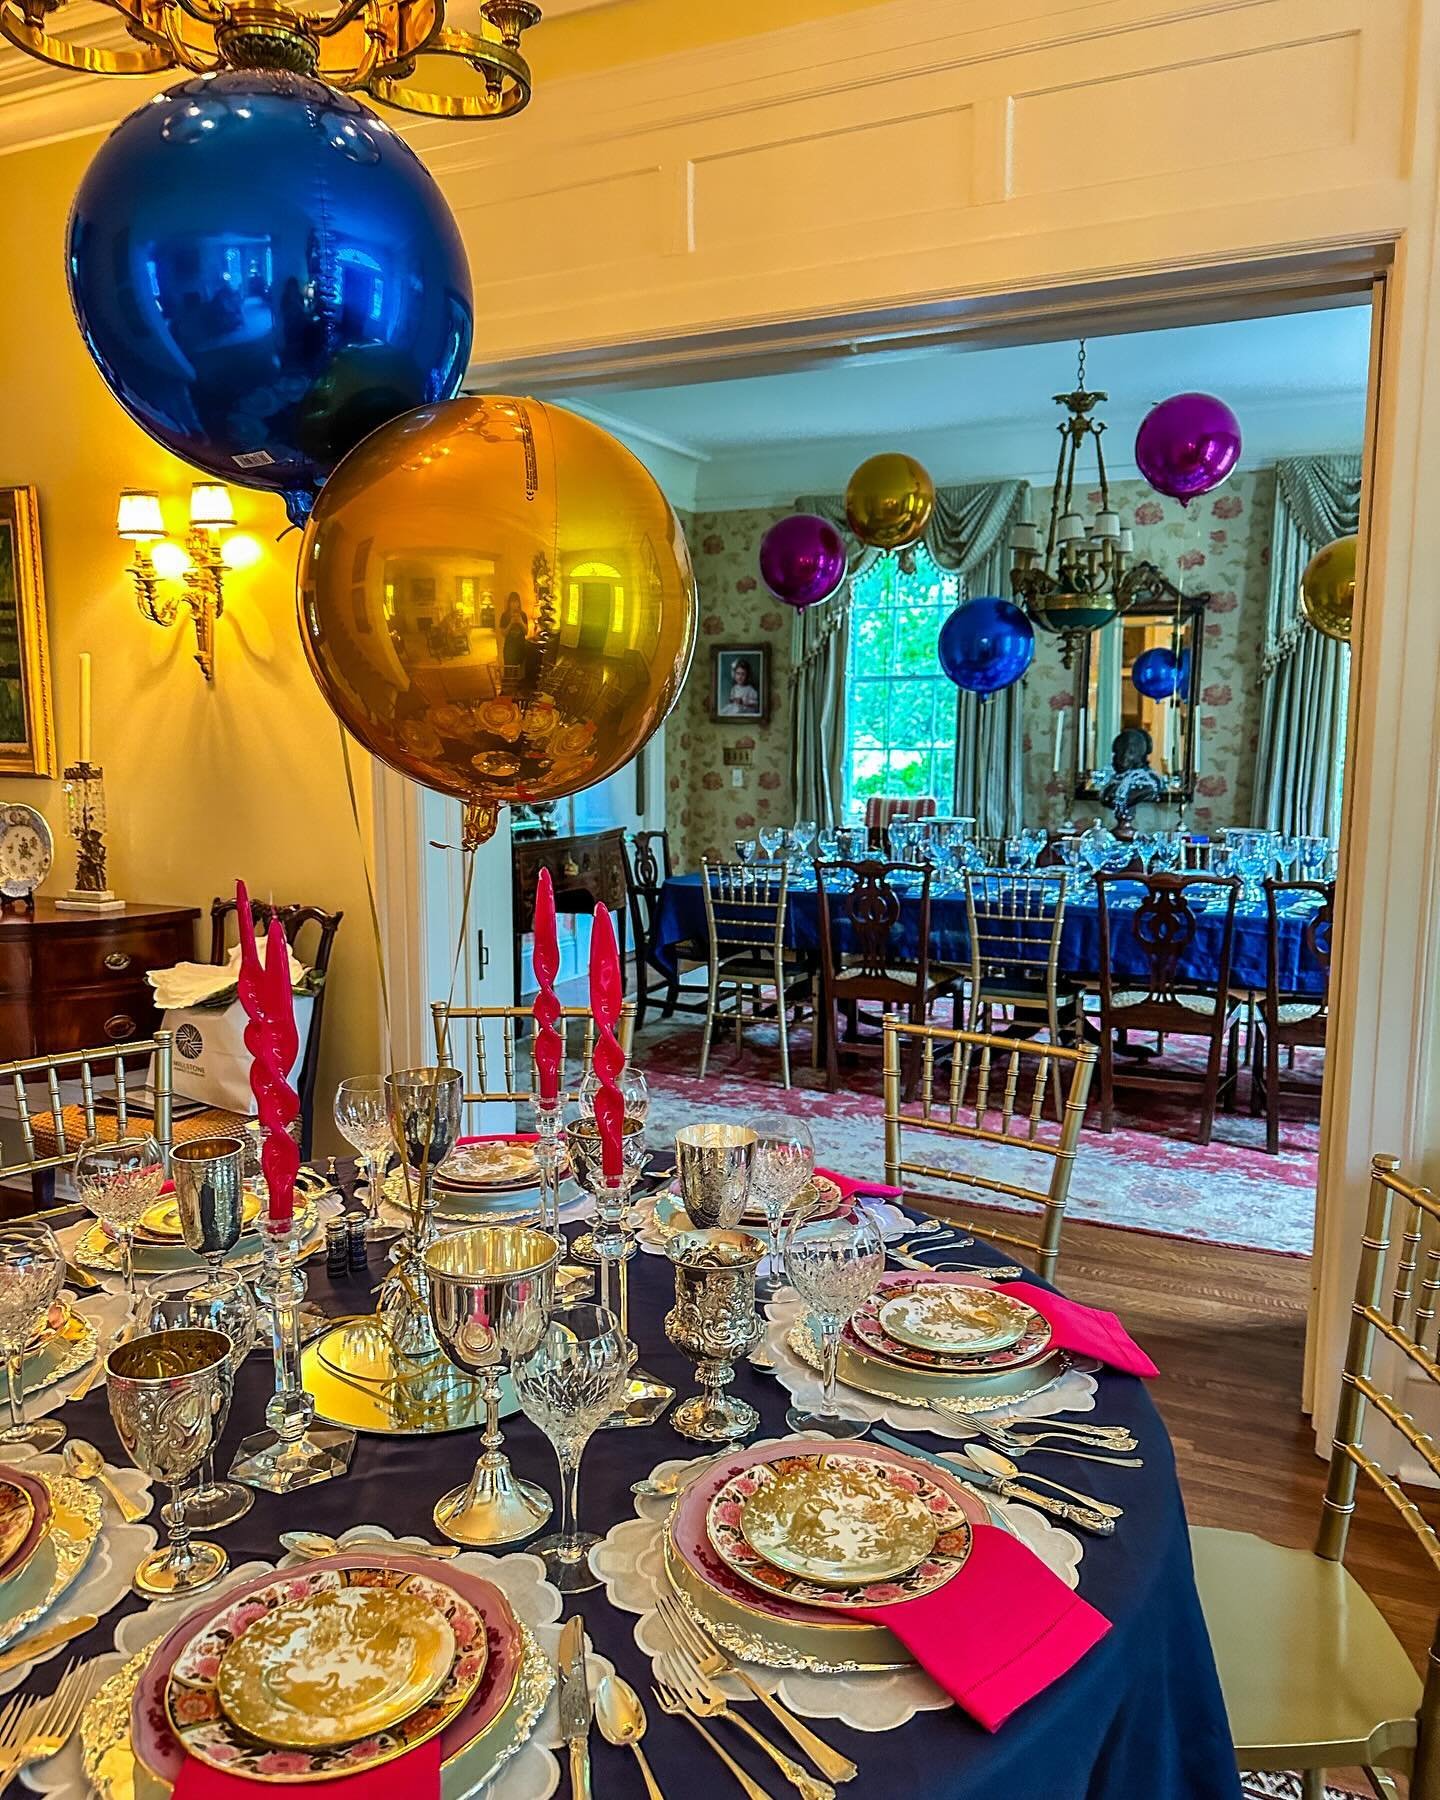 Balloons can be chic too! Especially when paired with beautiful table settings! 🩷💙✨ #popculturememphis